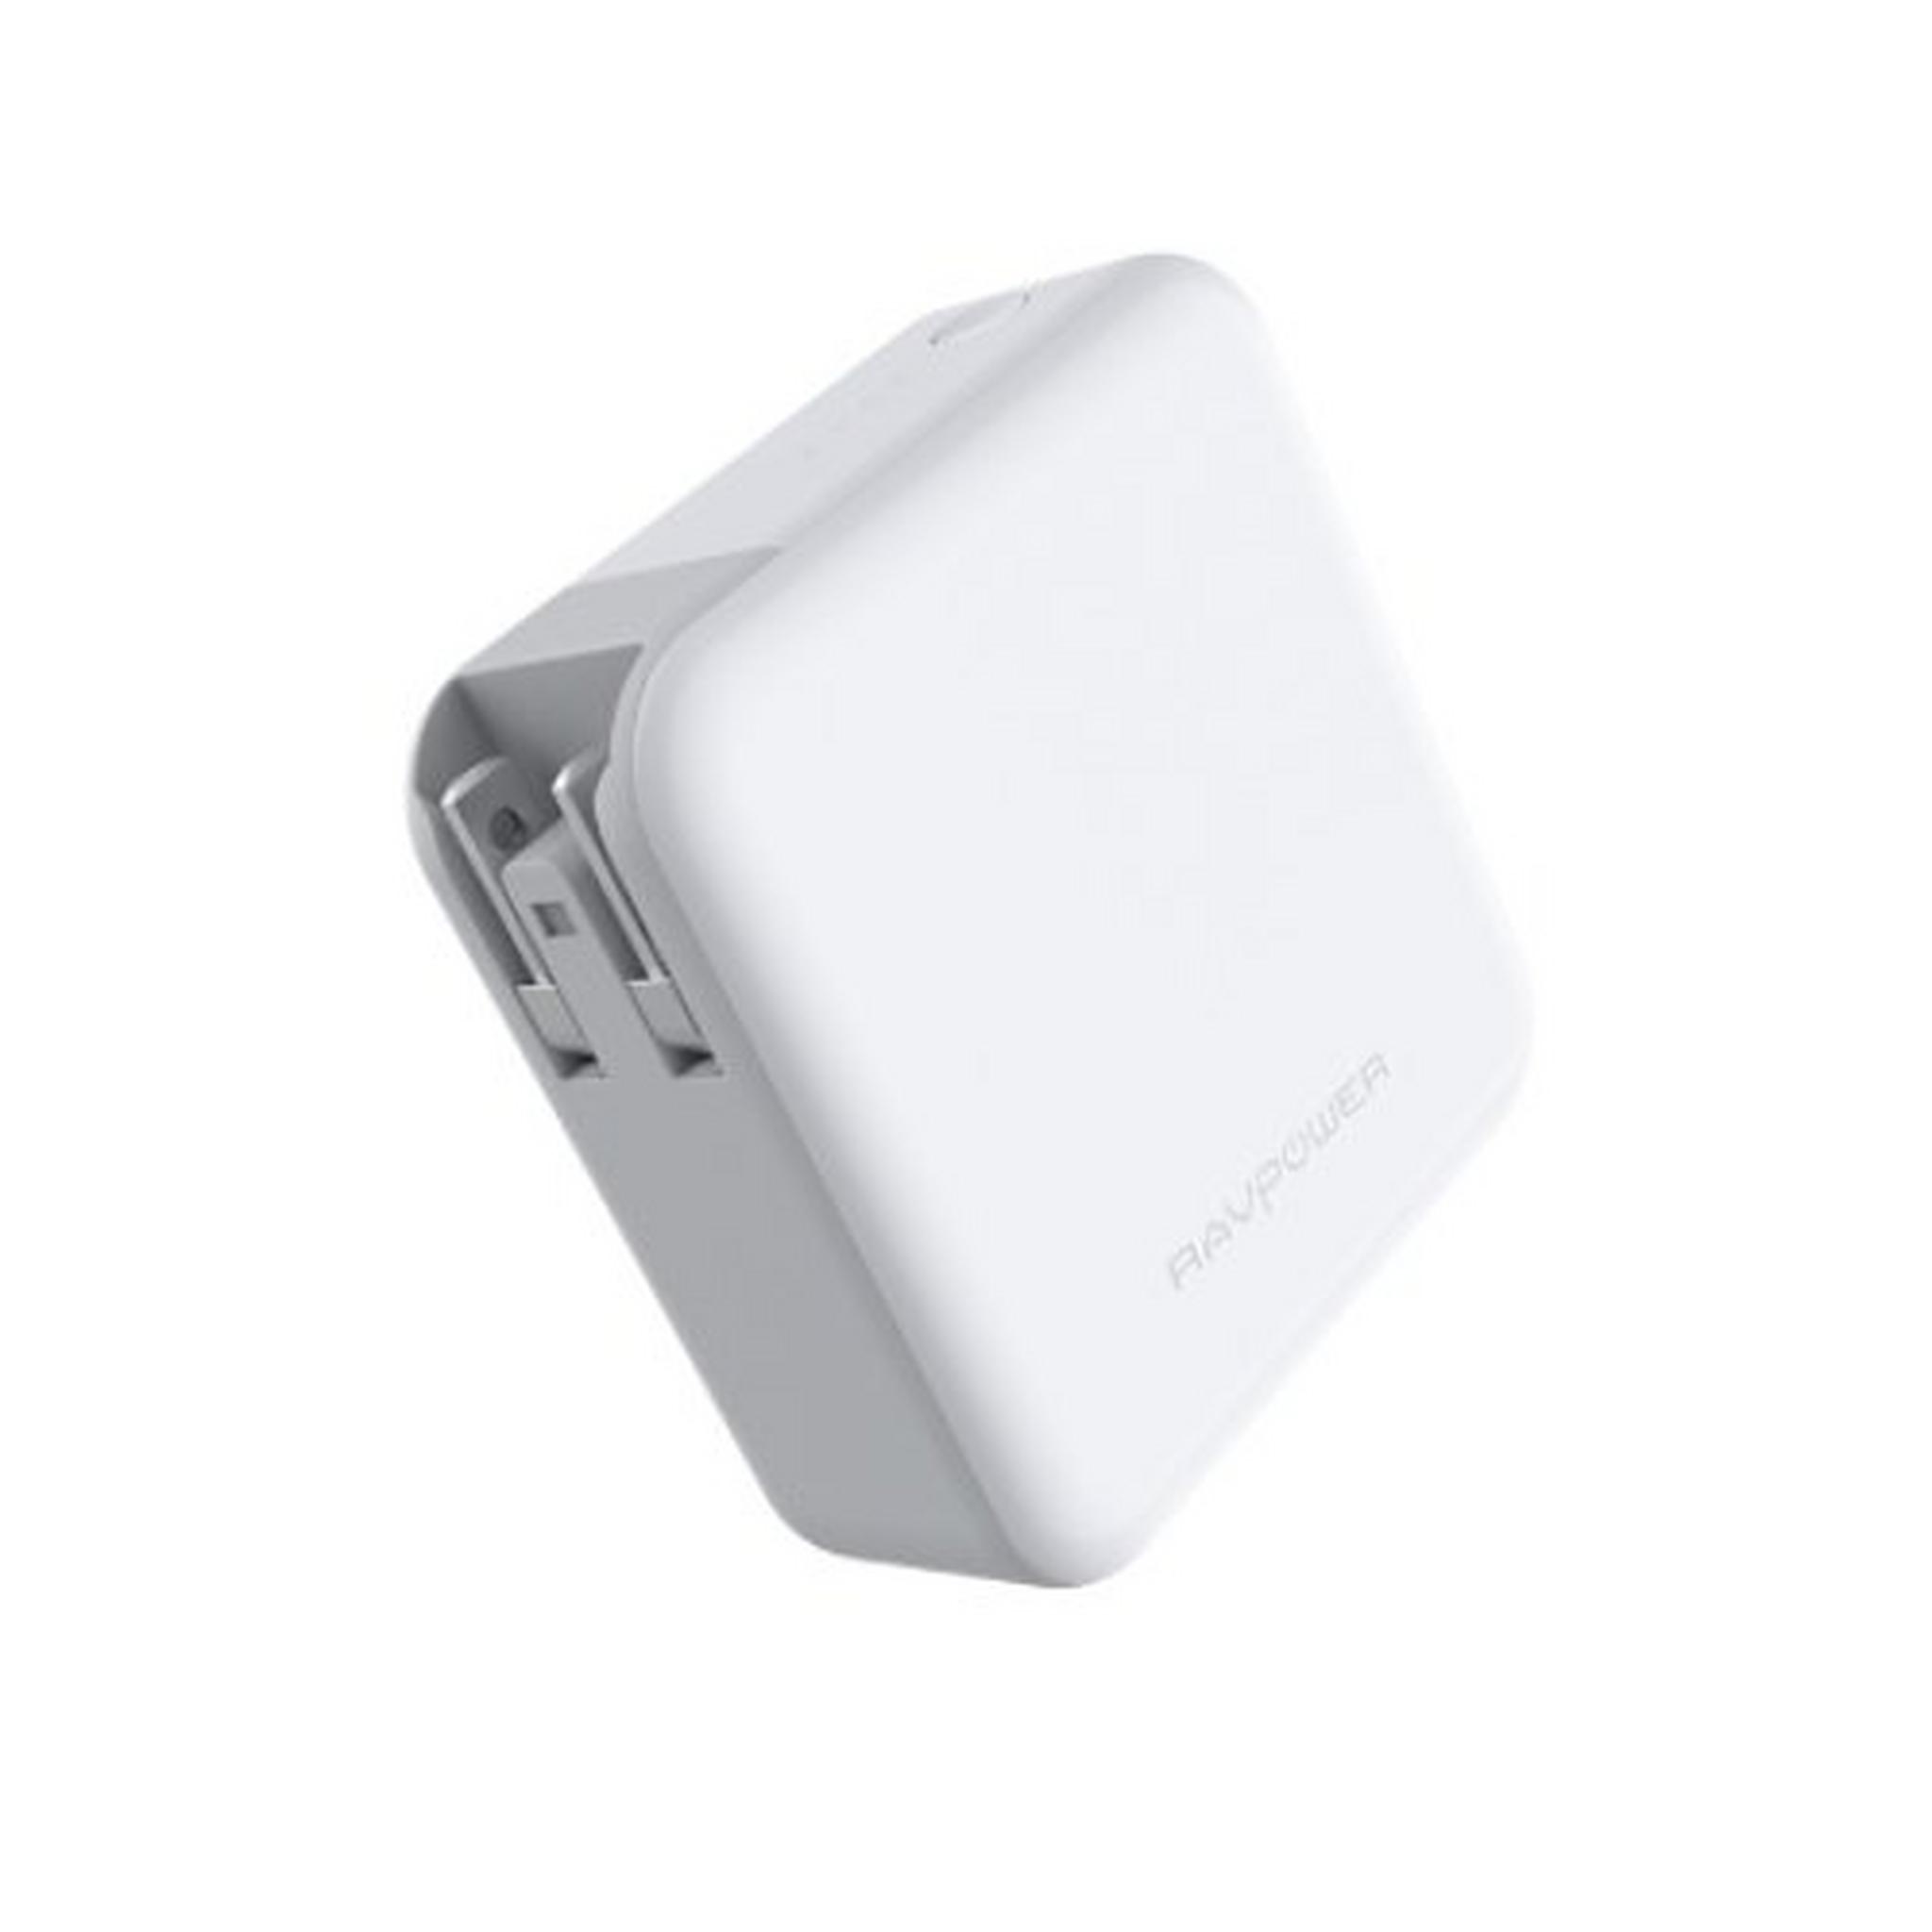 RAVPower 18w Wall Charger + Power Bank (RP-PB101) - White